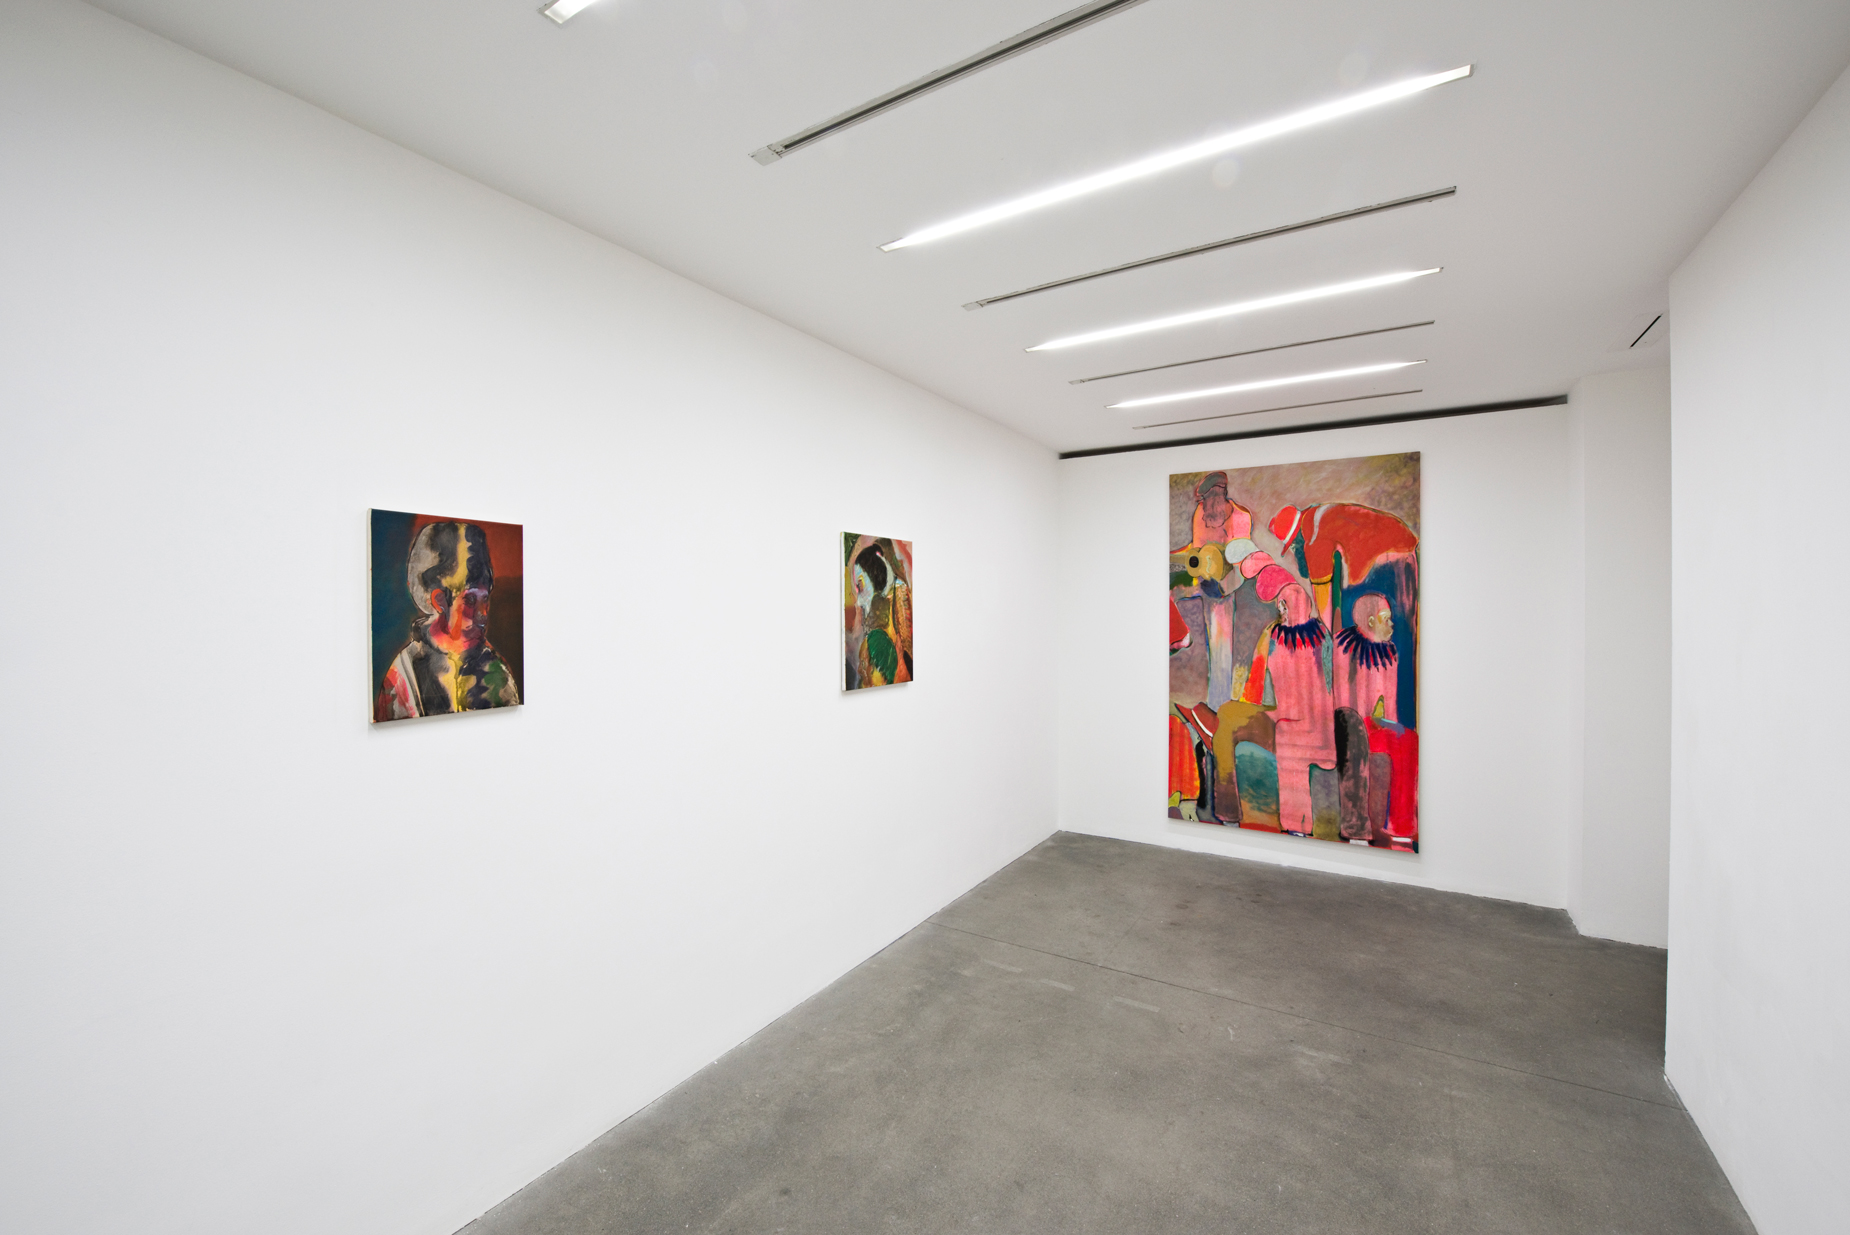 6 - Ryan Mosley at Alison Jacques 2014 London - 21.03.2014